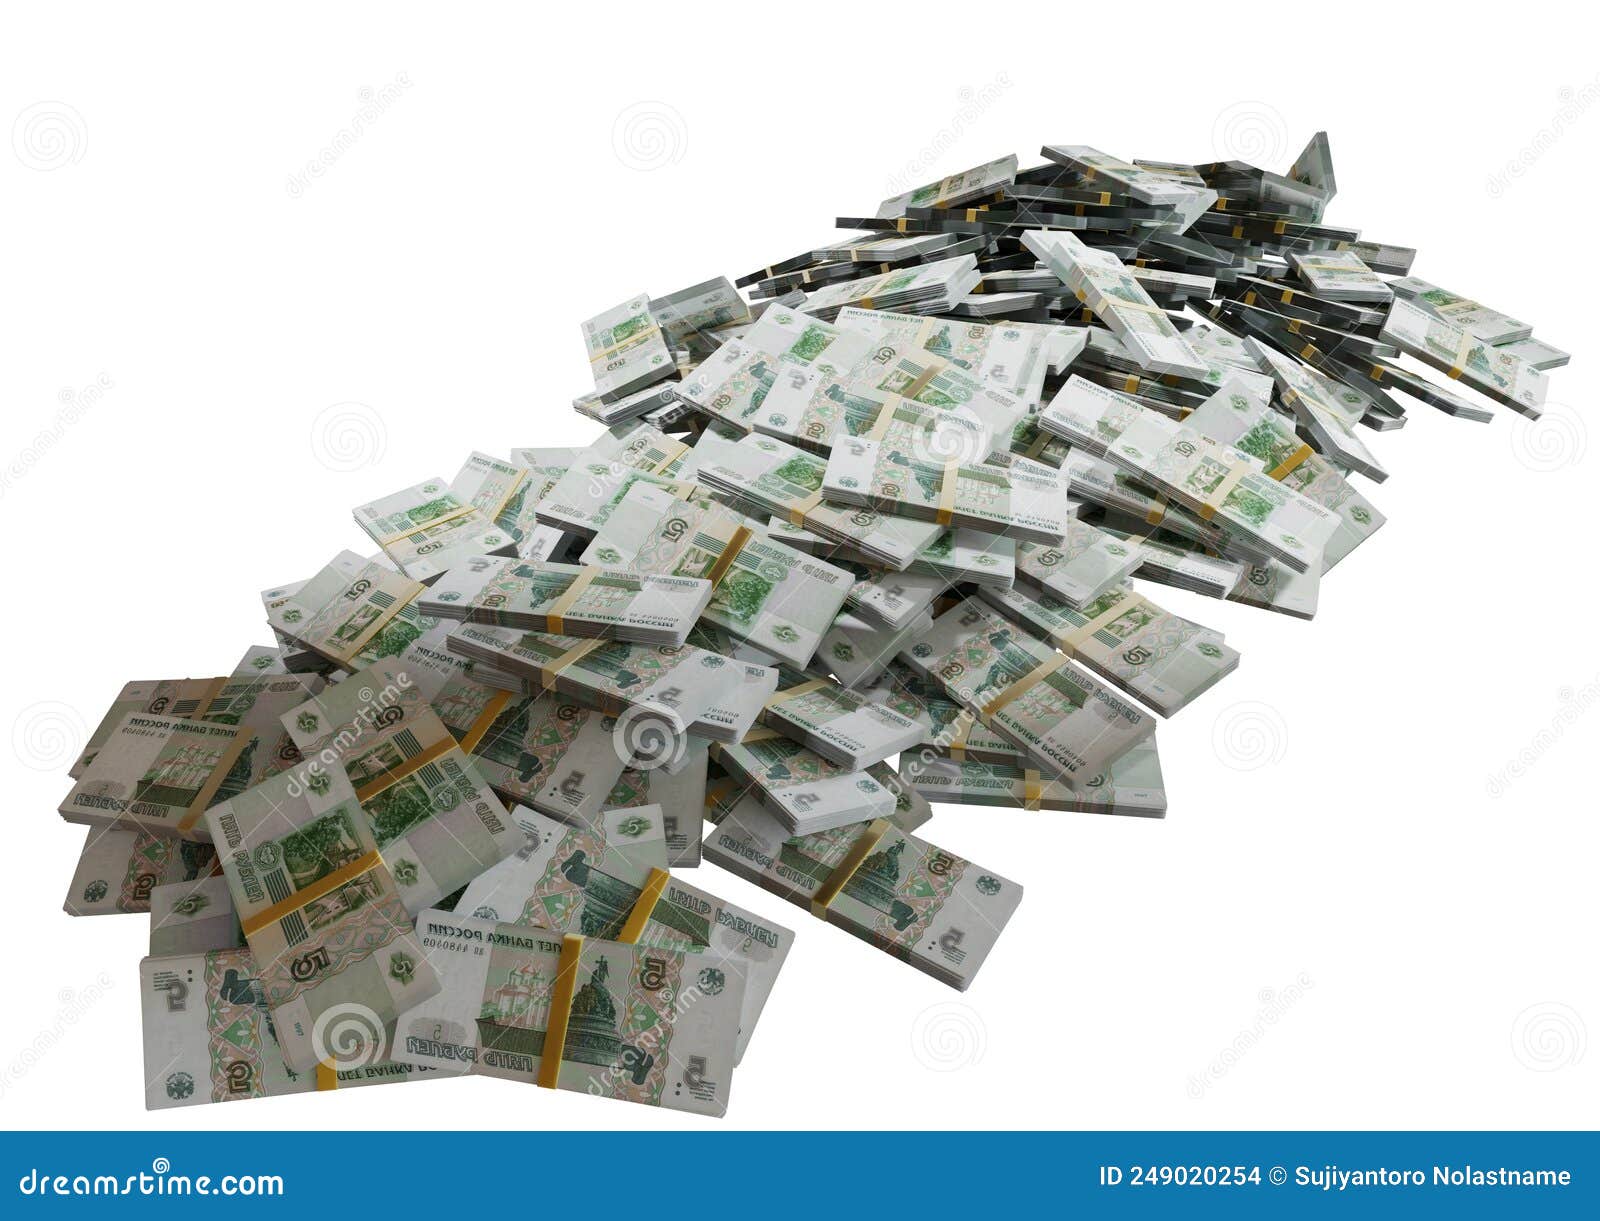 stack russian cash or banknotes of rusia rubles scattered on a white background  the concept of economic, finance